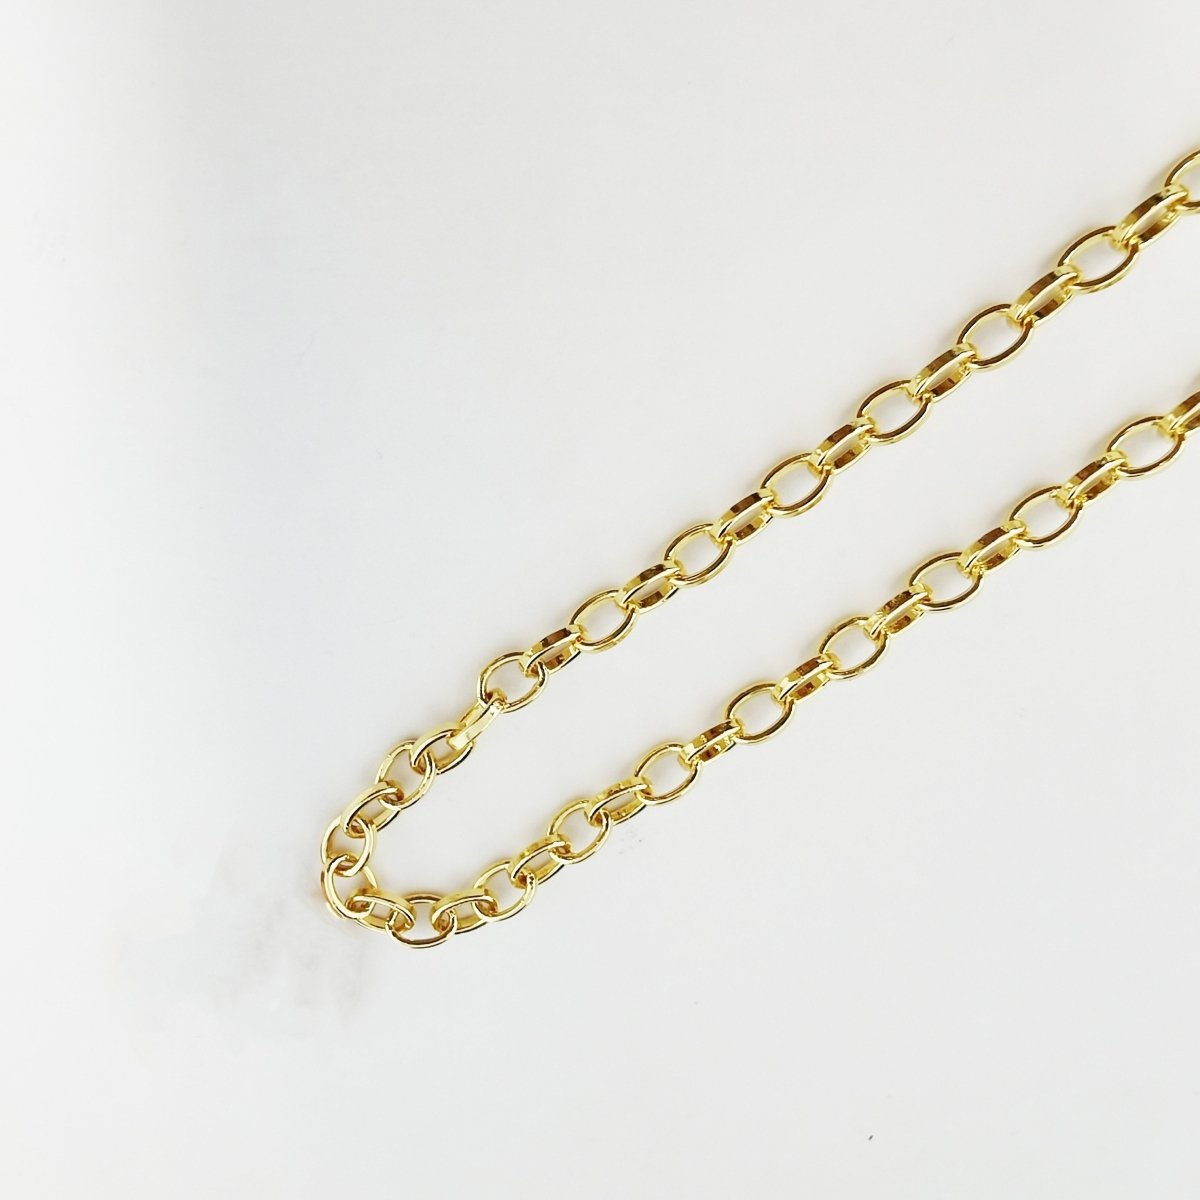 24K Gold Filled Rolo Link Chain, 5X4mm Rolo Chain, Dainty Rolo Chain by Yard, Rolo Chain For Jewelry Making, Necklace, Bracelet, Anklet Supply Component | ROLL-191 Clearance Pricing - DLUXCA